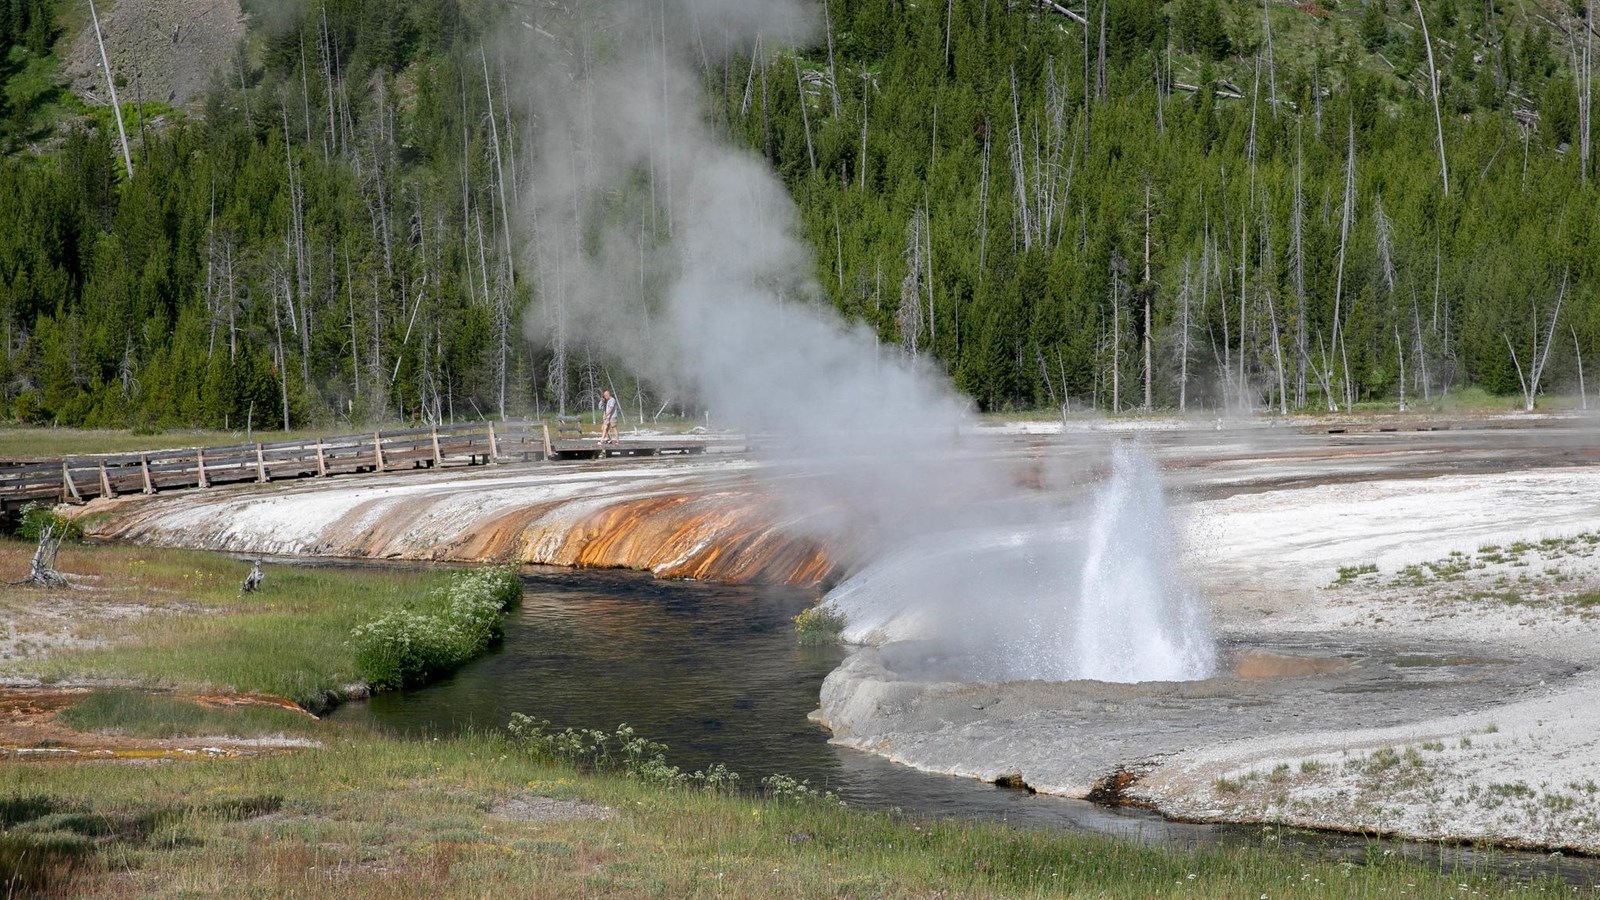 A geyser erupts on the edge of a stream in hydrothermal basin.